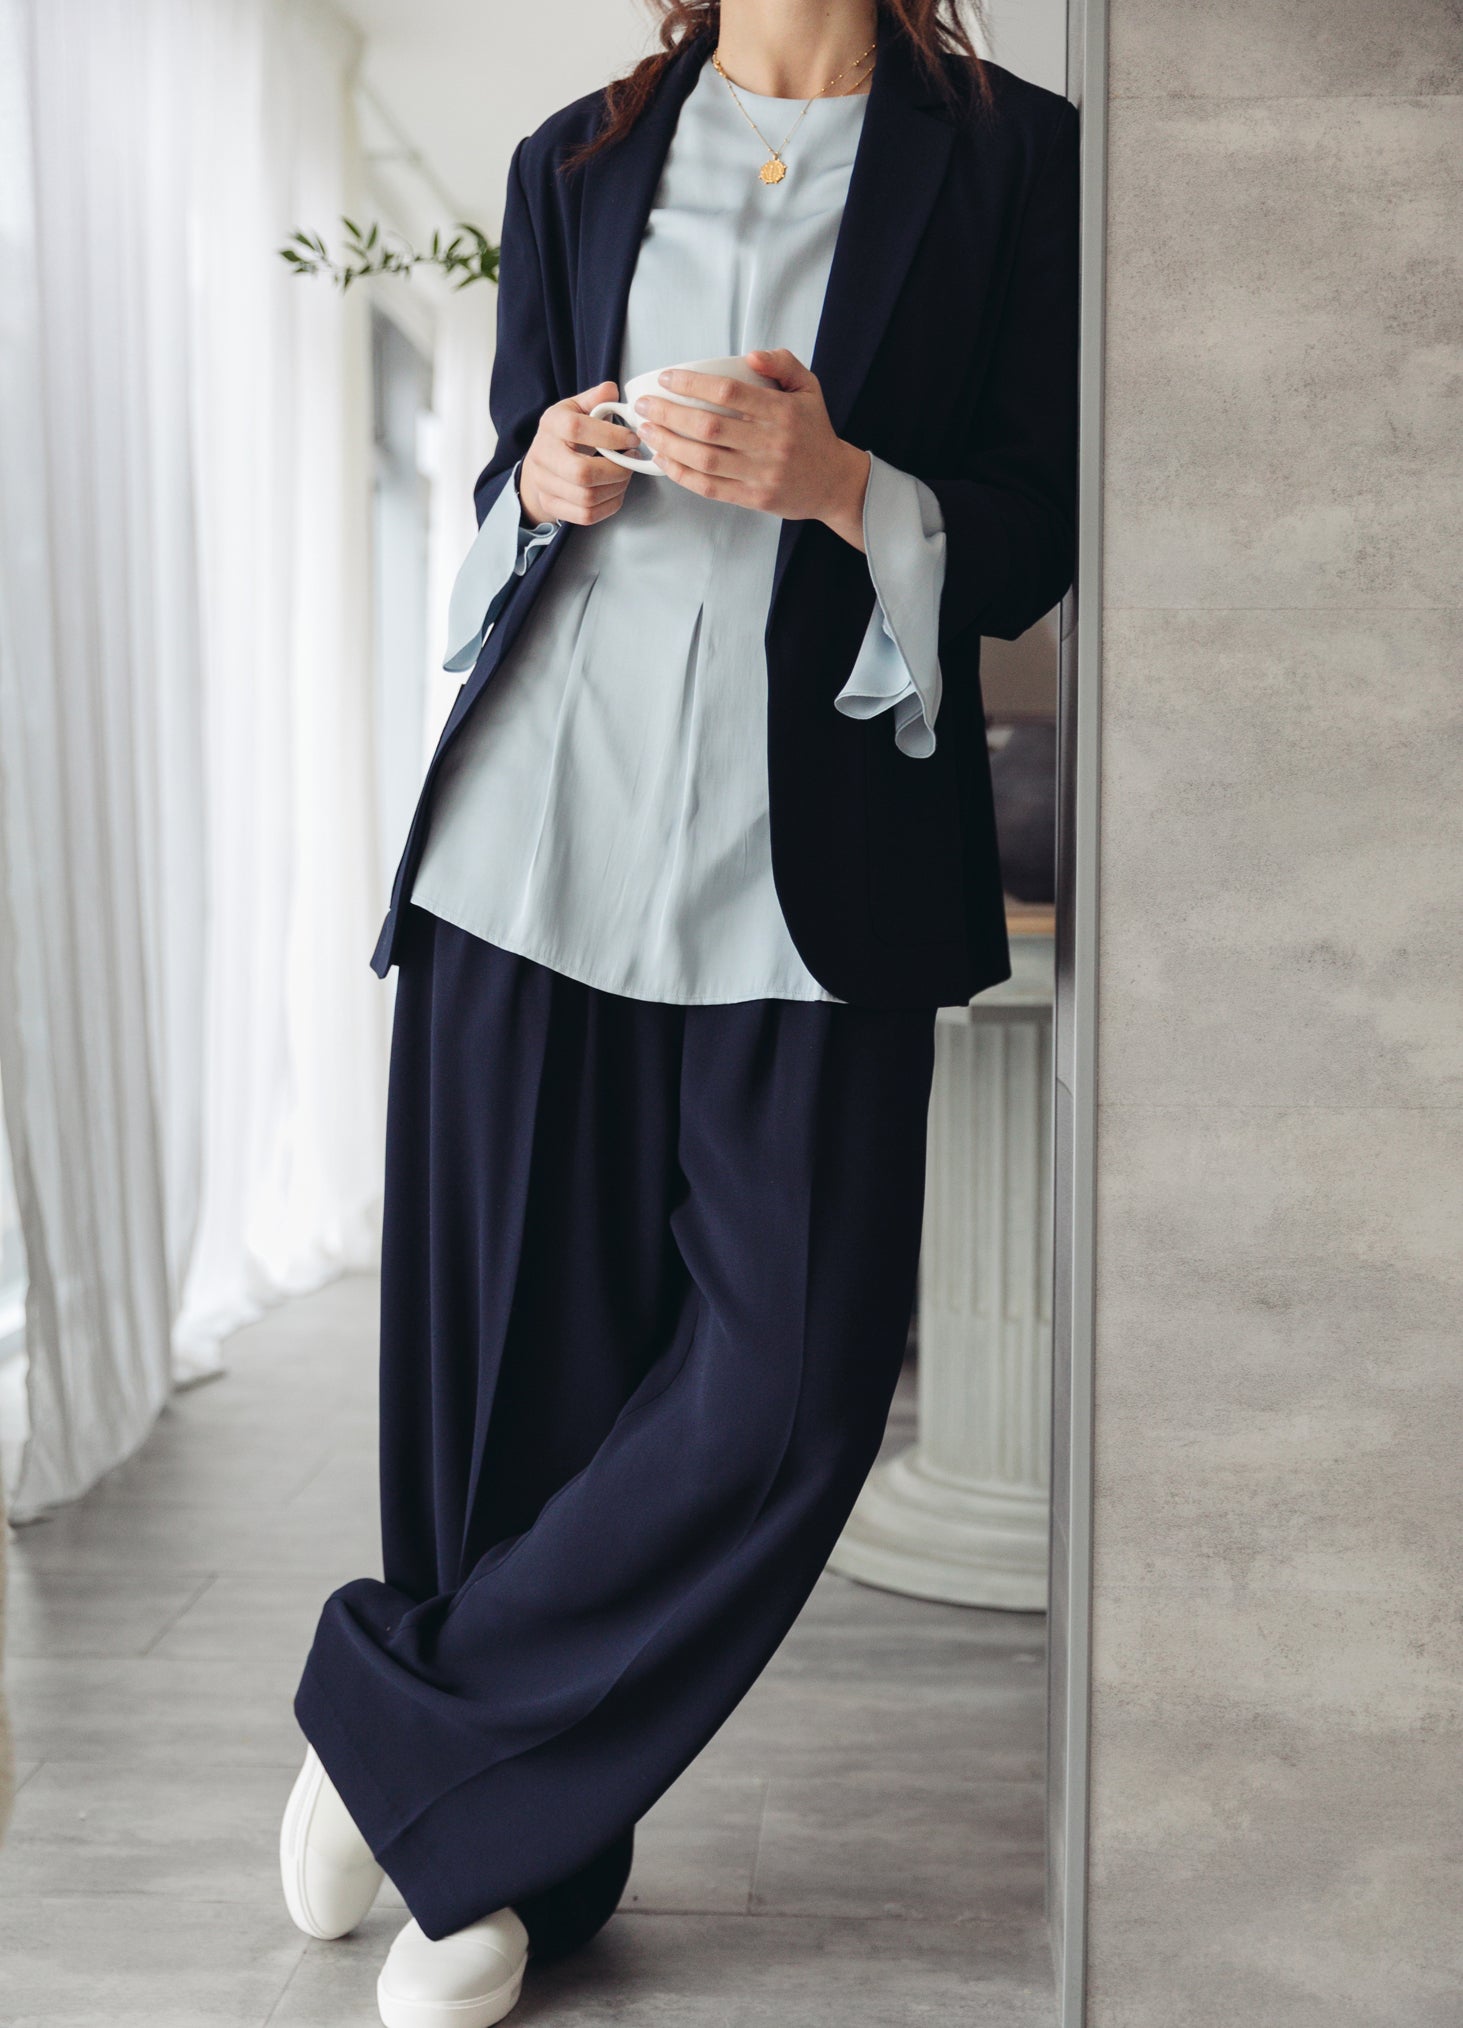 Relaxed Tailoring Statement Jacket in Classic Navy for Summer, Ruched Sleeves